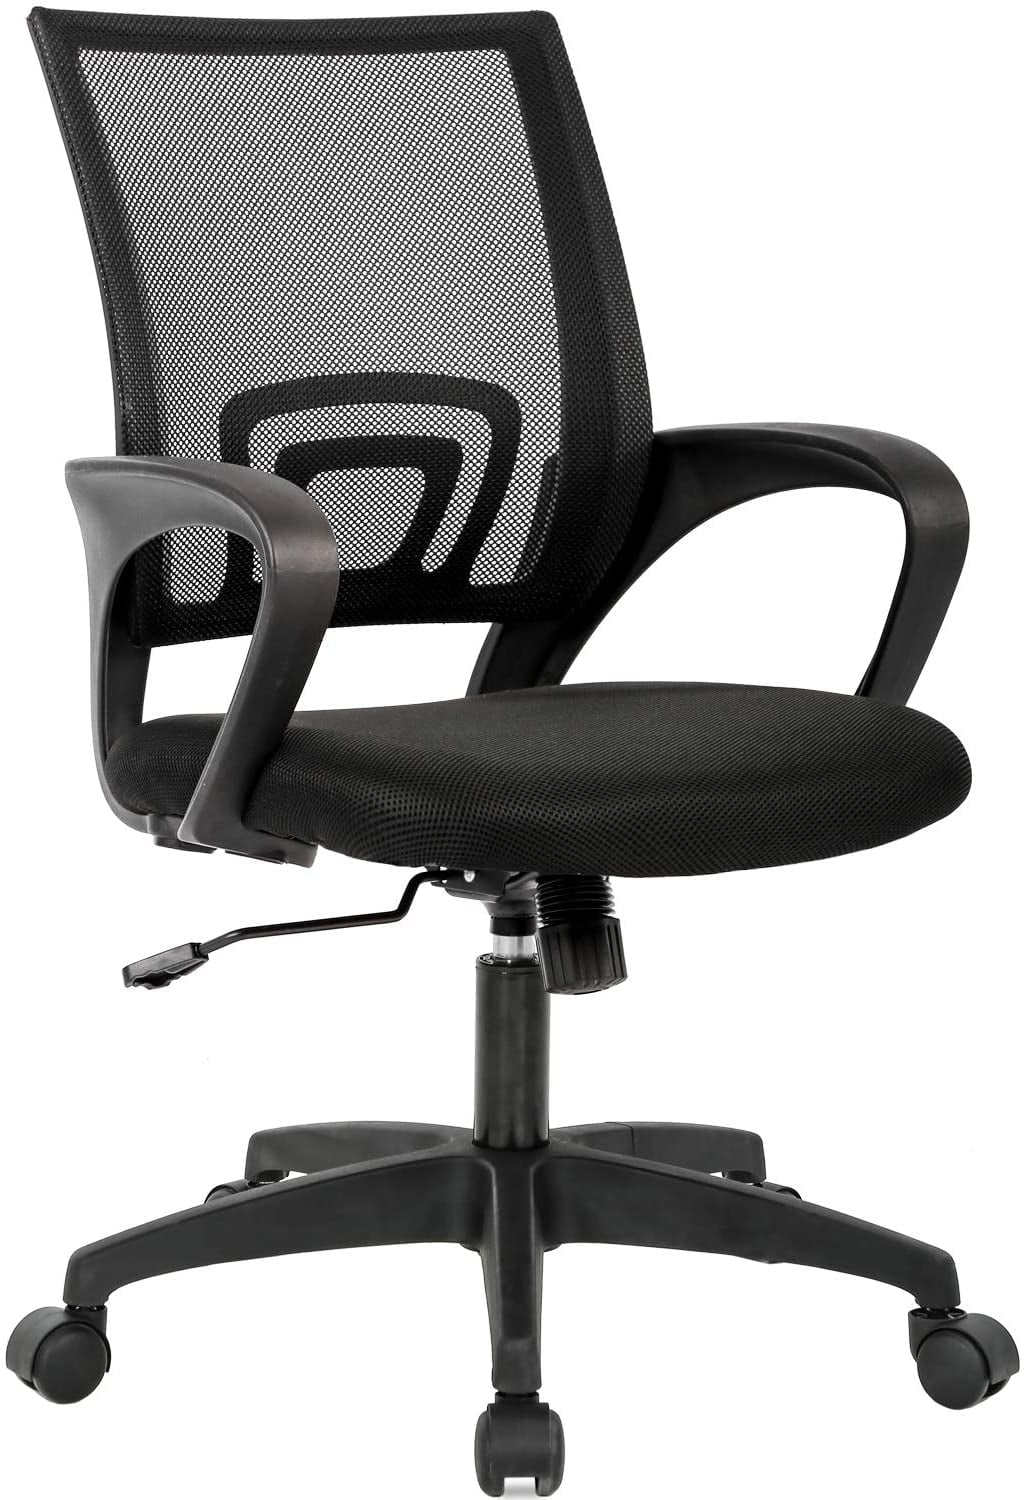 Farini Ergonomic Office Chair Mid-Back Mesh Executive Swivel Desk Chair with Lumbar Support Adjustable Height Arm Black 